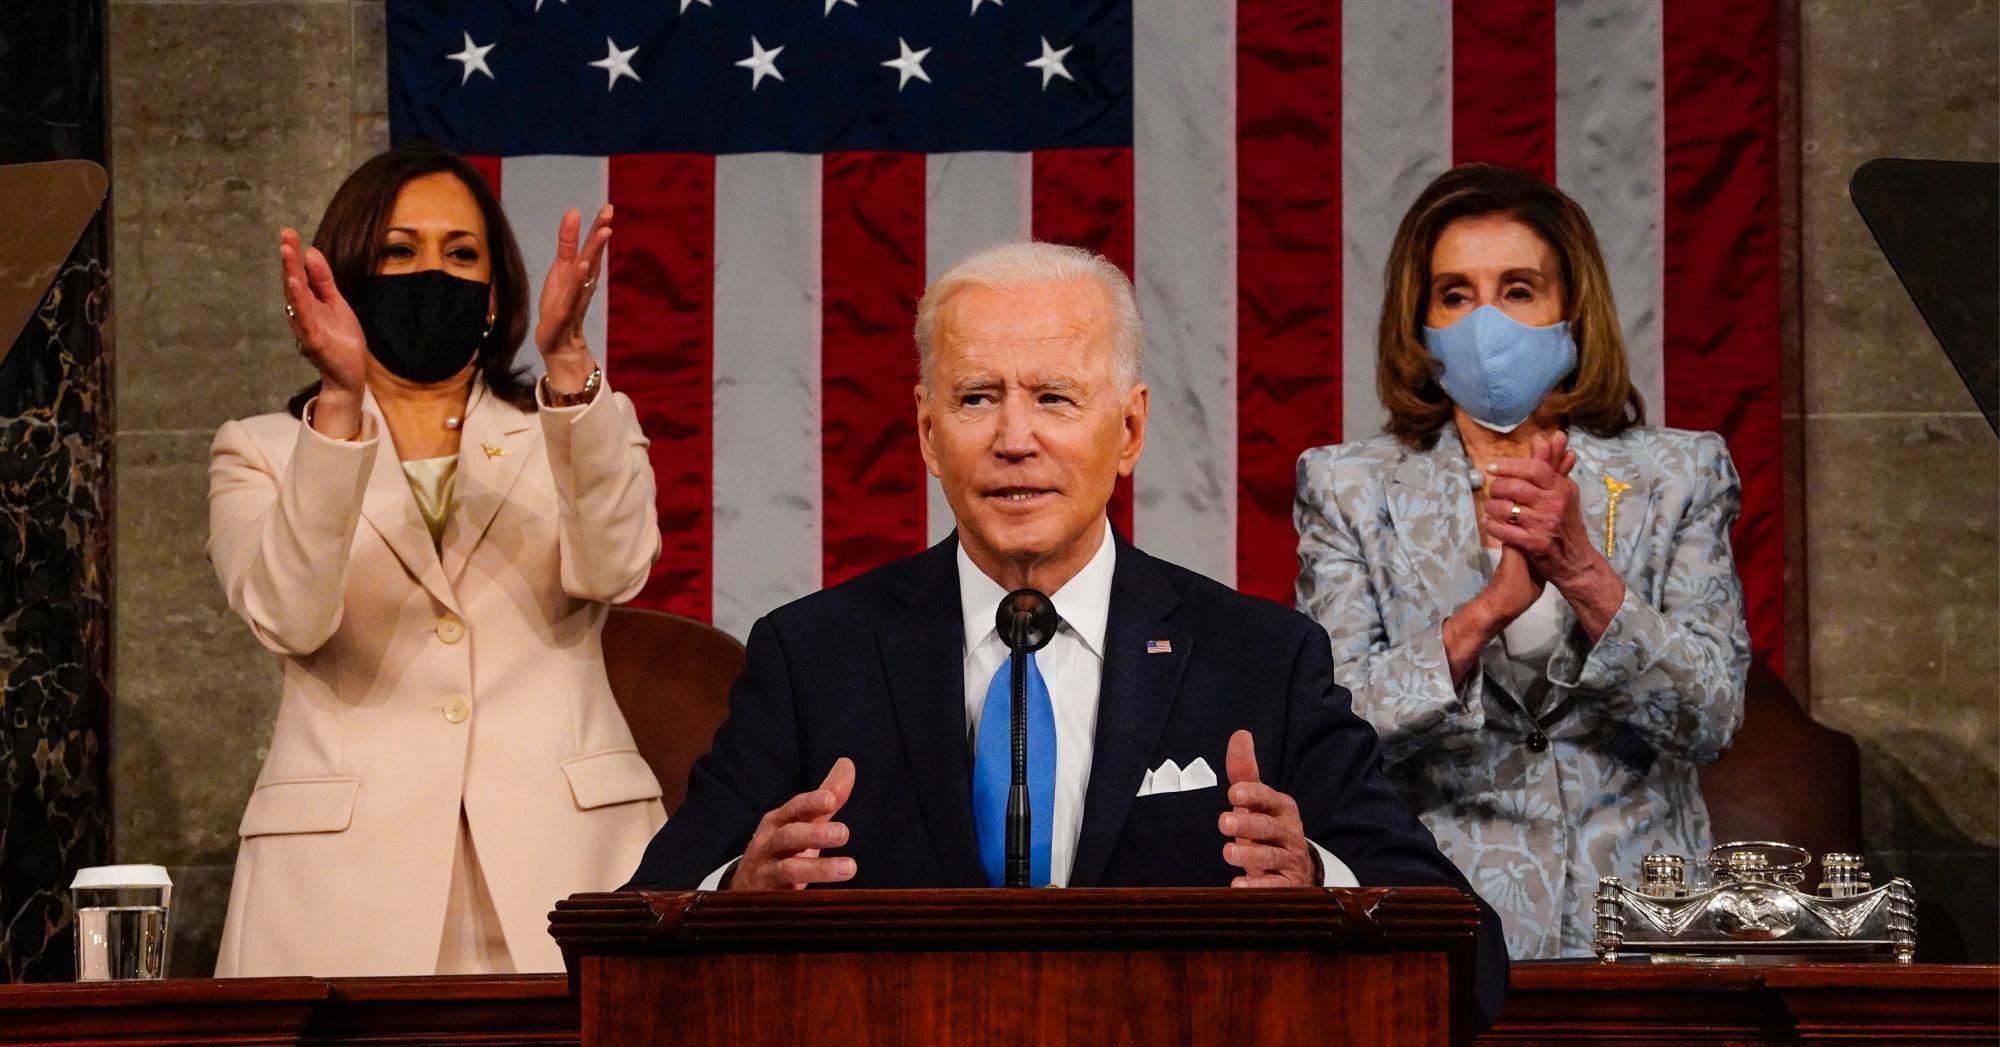 President Joe Biden addresses a joint session of Congress, with Vice President Kamala Harris and House Speaker Nancy Pelosi (D-Calif.) on the dais behind him, on April 28, 2021 in Washington, D.C.